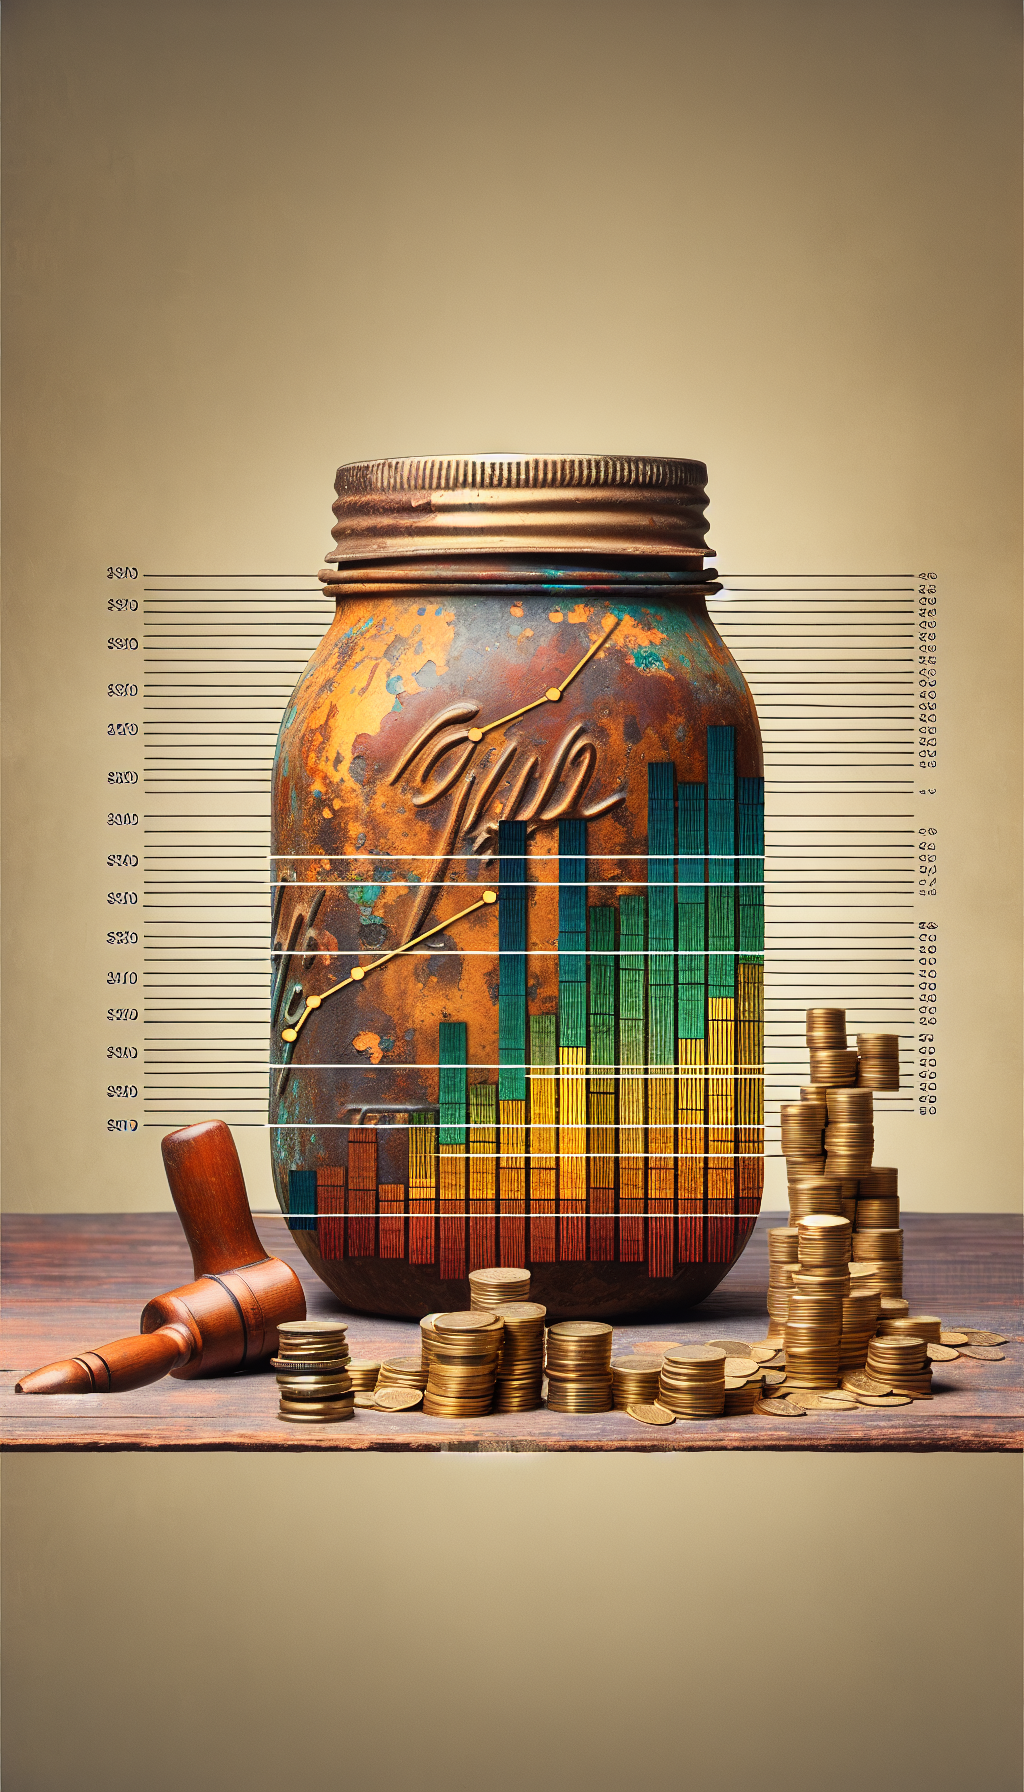 An illustration depicts a vintage mason jar transformed into a dynamic bar graph, where the patina serves as varying levels on the graph, each level indicating a different factor that affects its value such as rarity, color, and age. Golden coins and auction gavels are nestled at the jar's base, symbolizing the market's valuation of these antiquities.